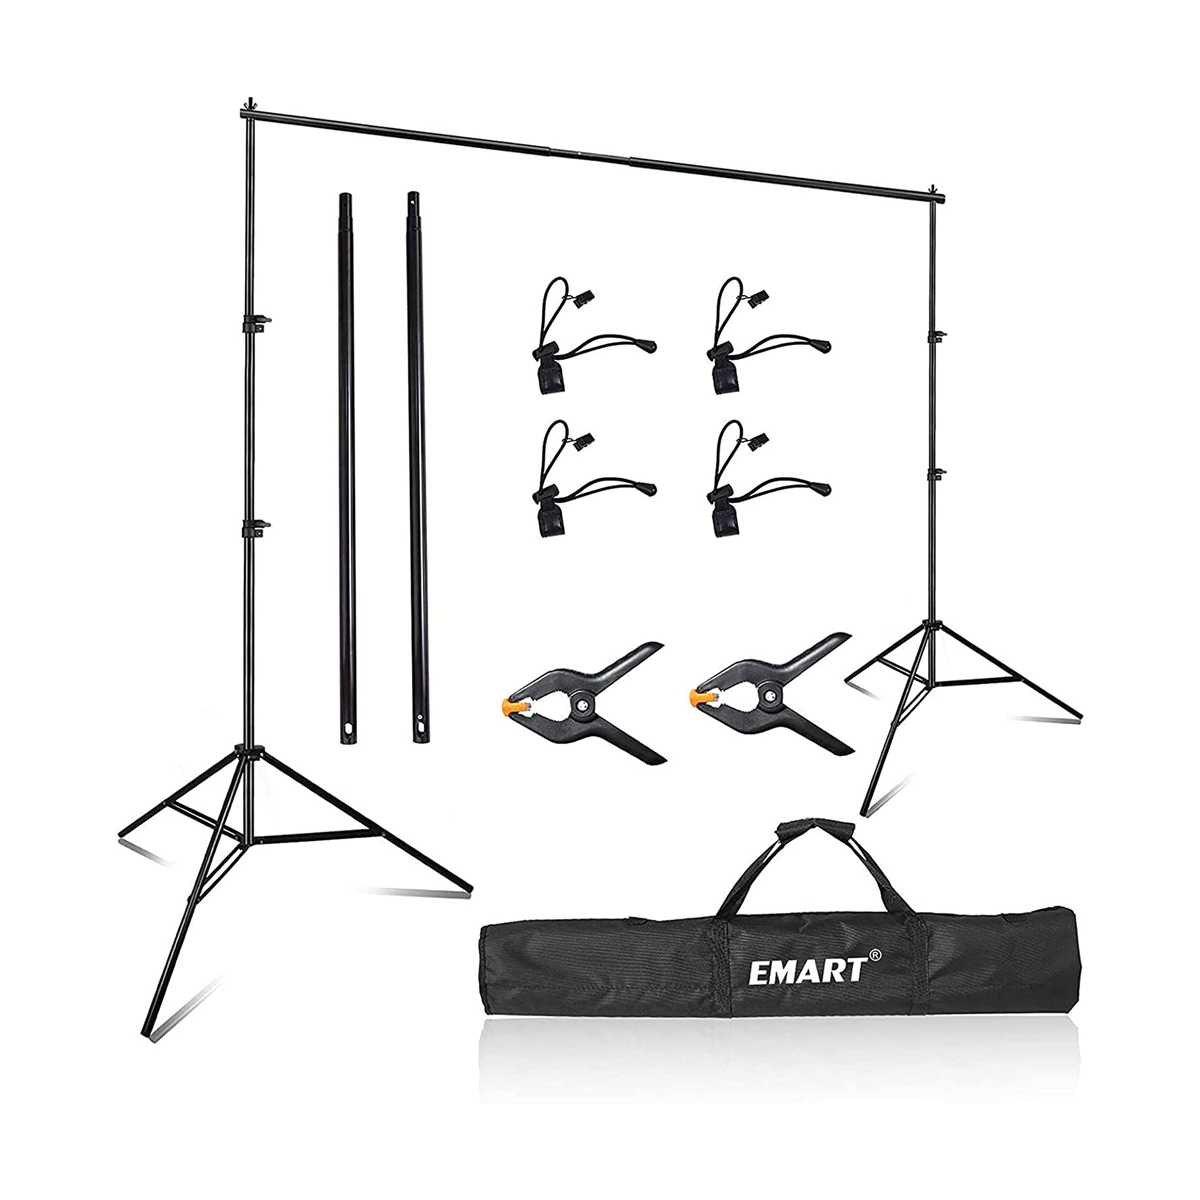 EMART 8 x 8 ft Heavy Duty Photography Backdrop Stand